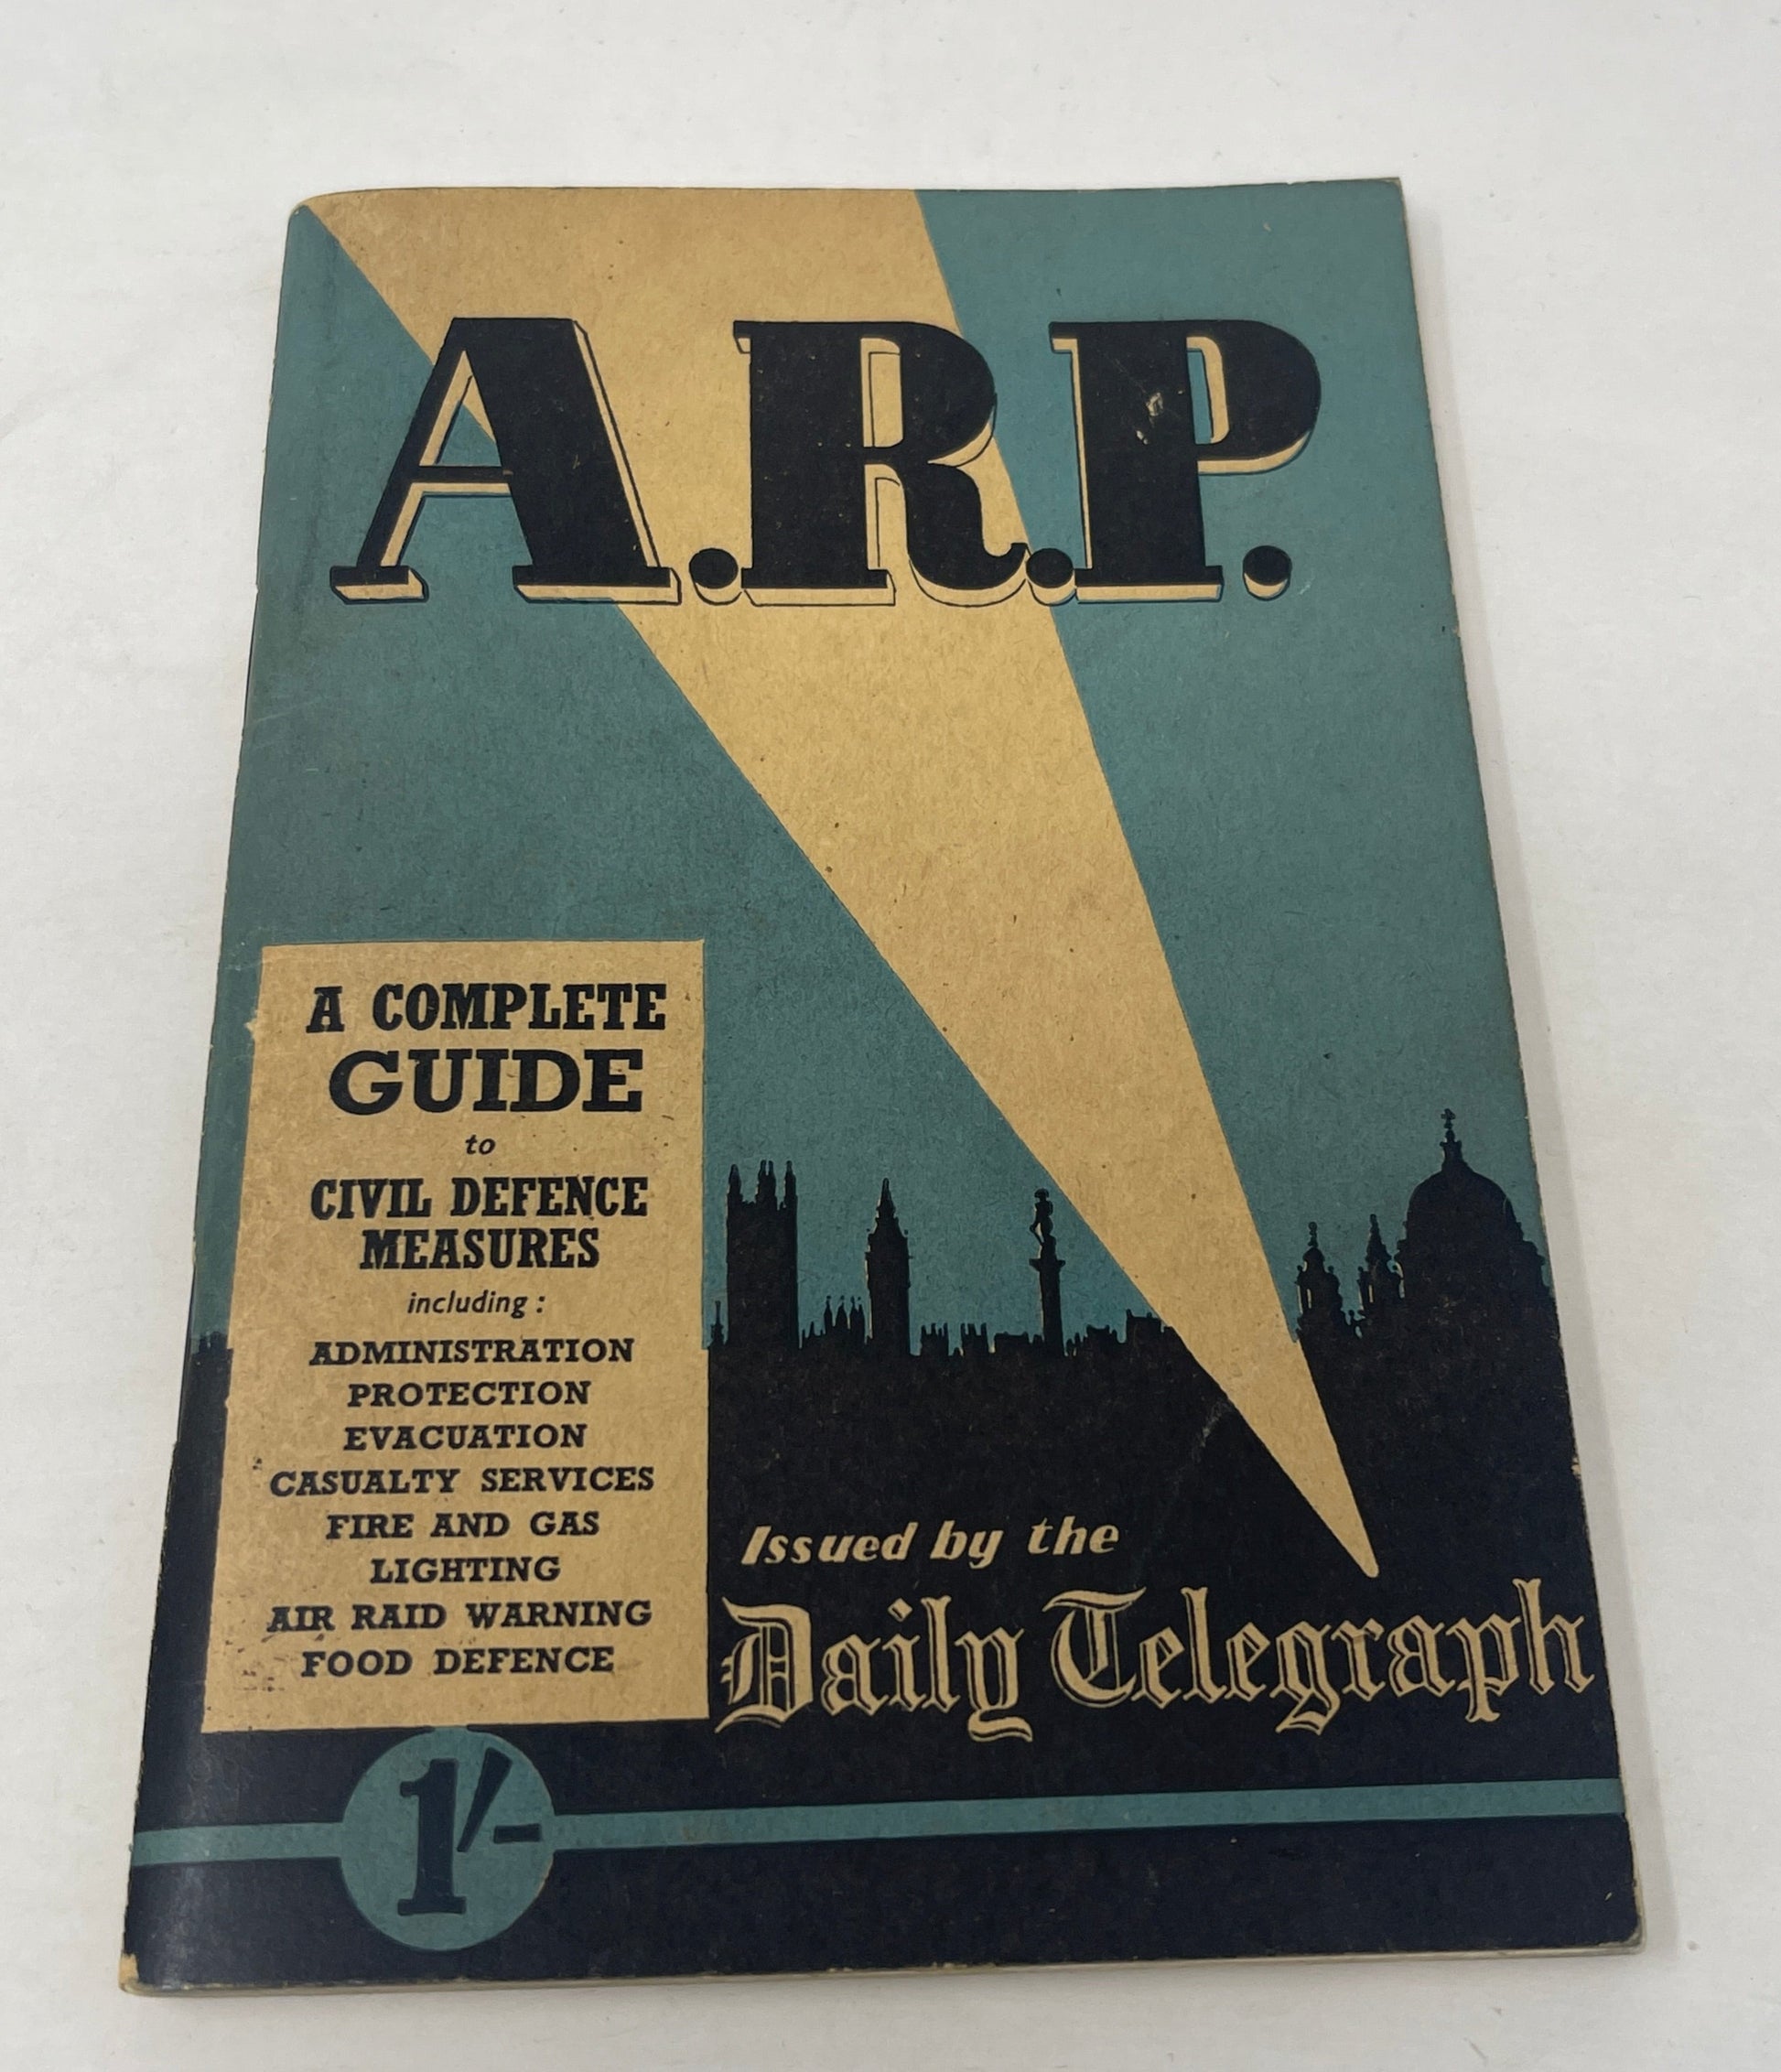 WW2 ARP A Complete Guide To Civil Defence Measures